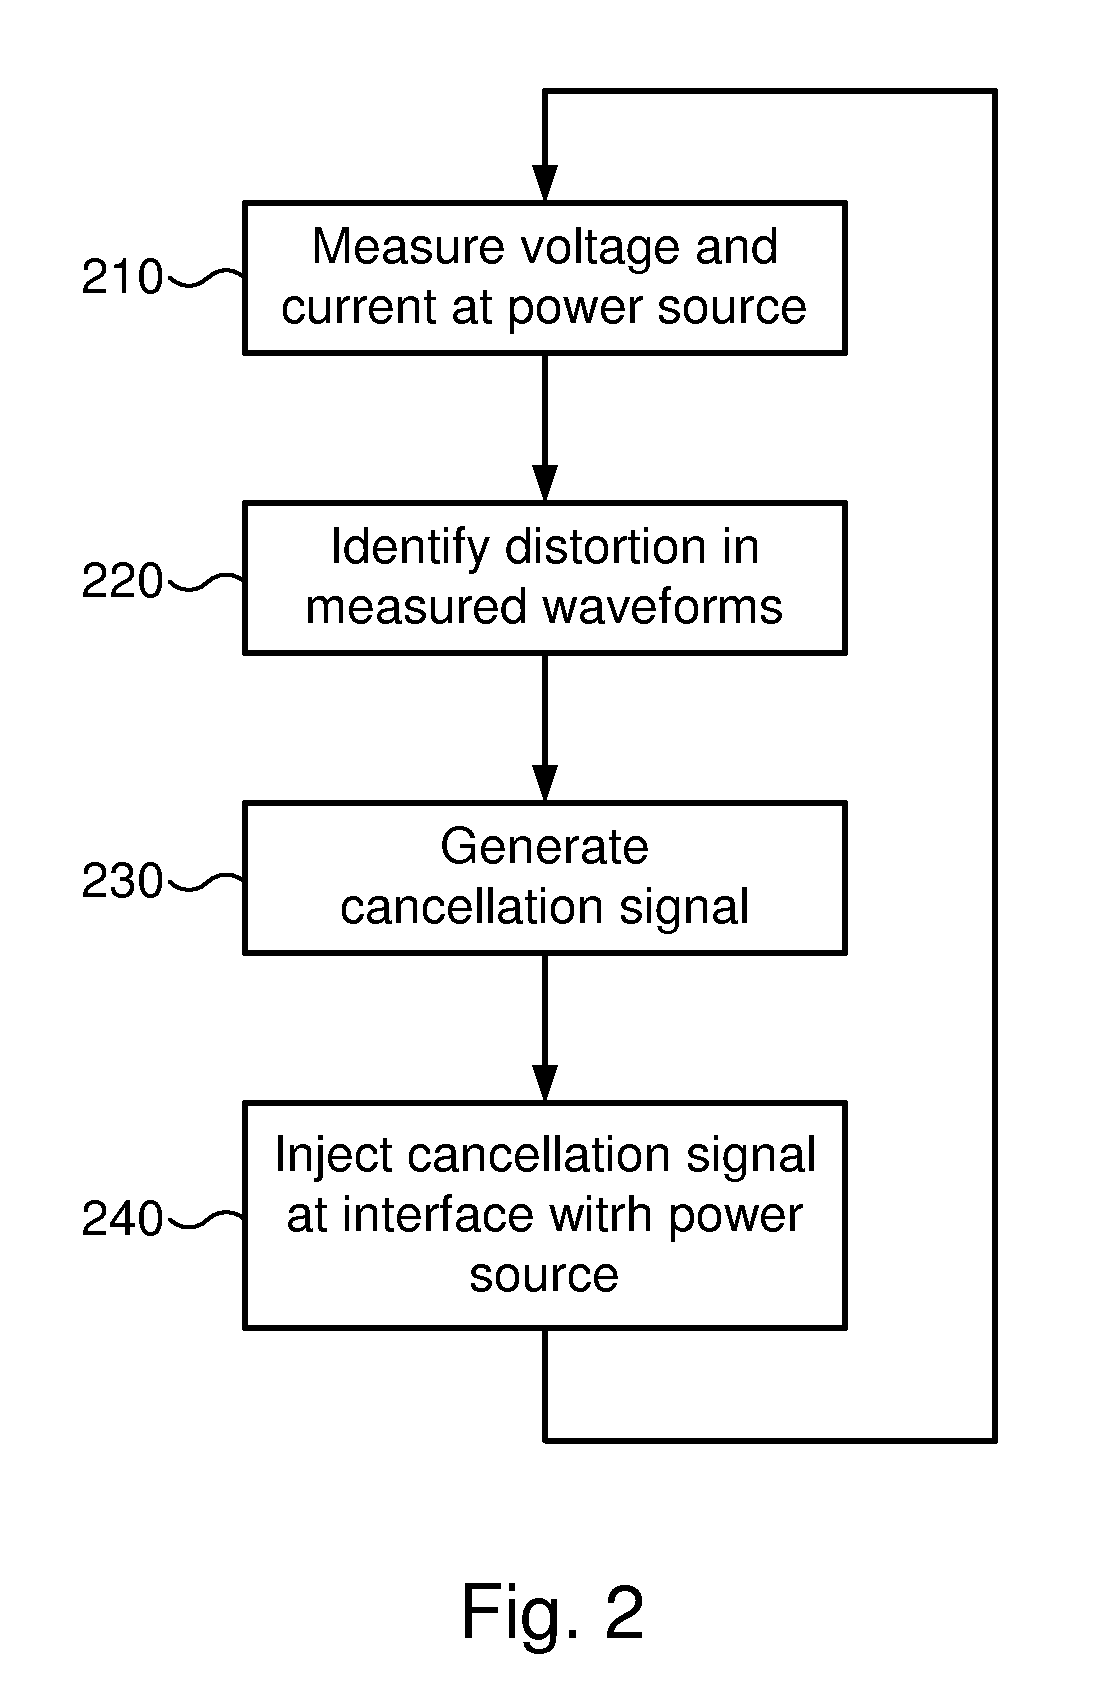 Systems and Methods for Reducing Distortion in a Power Source Using an Active Harmonics Filter